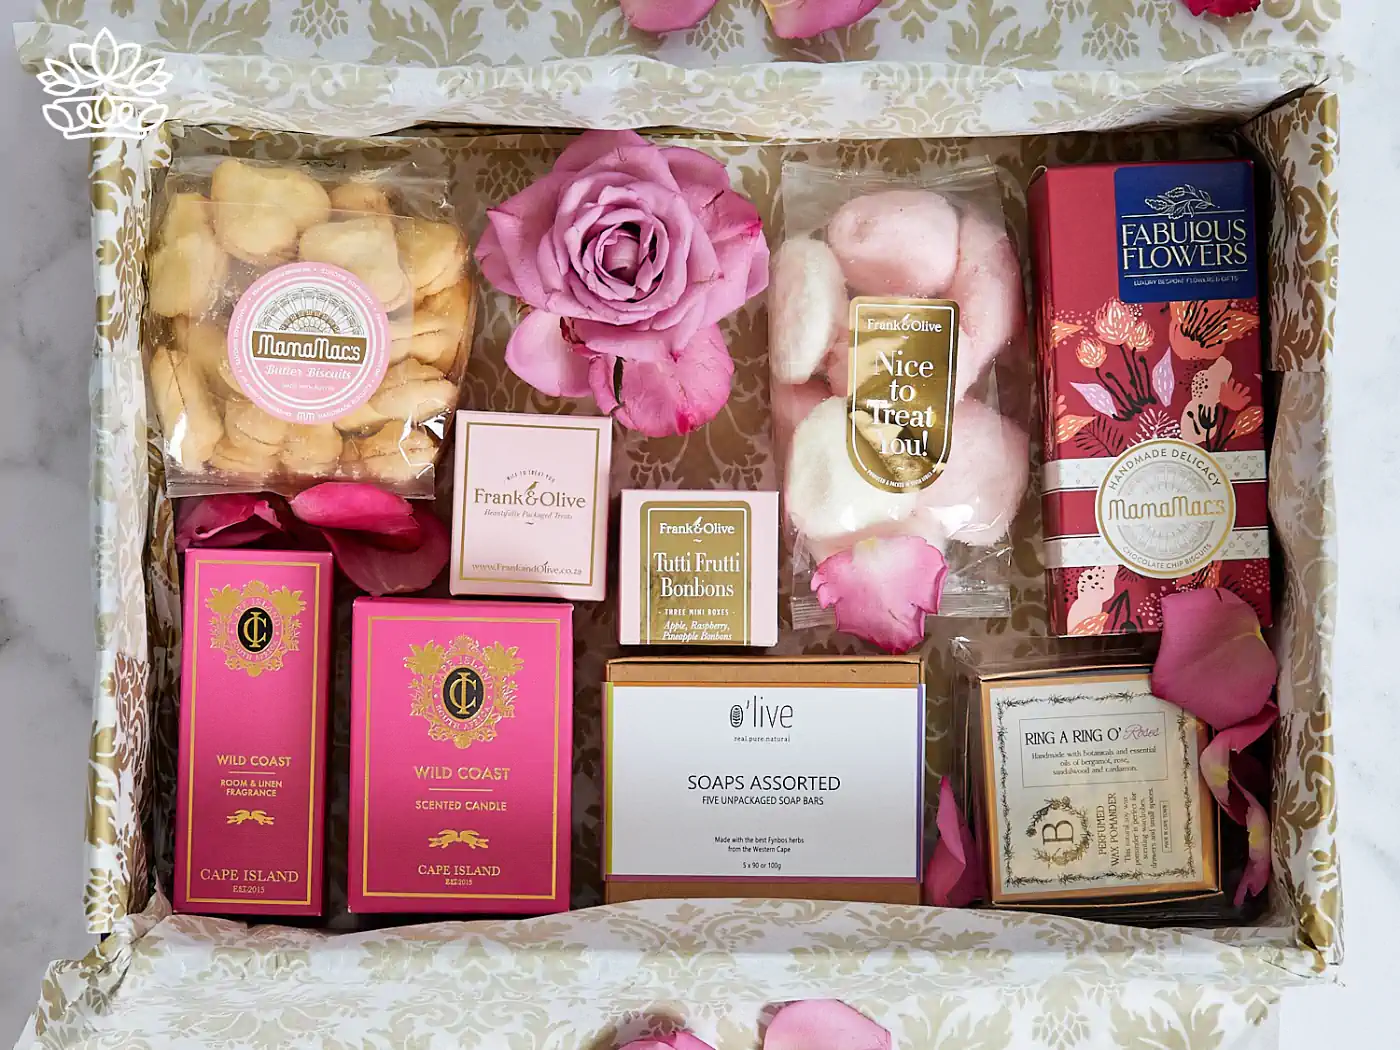 Luxury get well gift box filled with assorted treats including butter biscuits, scented candles, room fragrance, and artisanal soaps, all elegantly displayed amongst fresh rose petals. Delivered with Heart. Fabulous Flowers and Gifts.